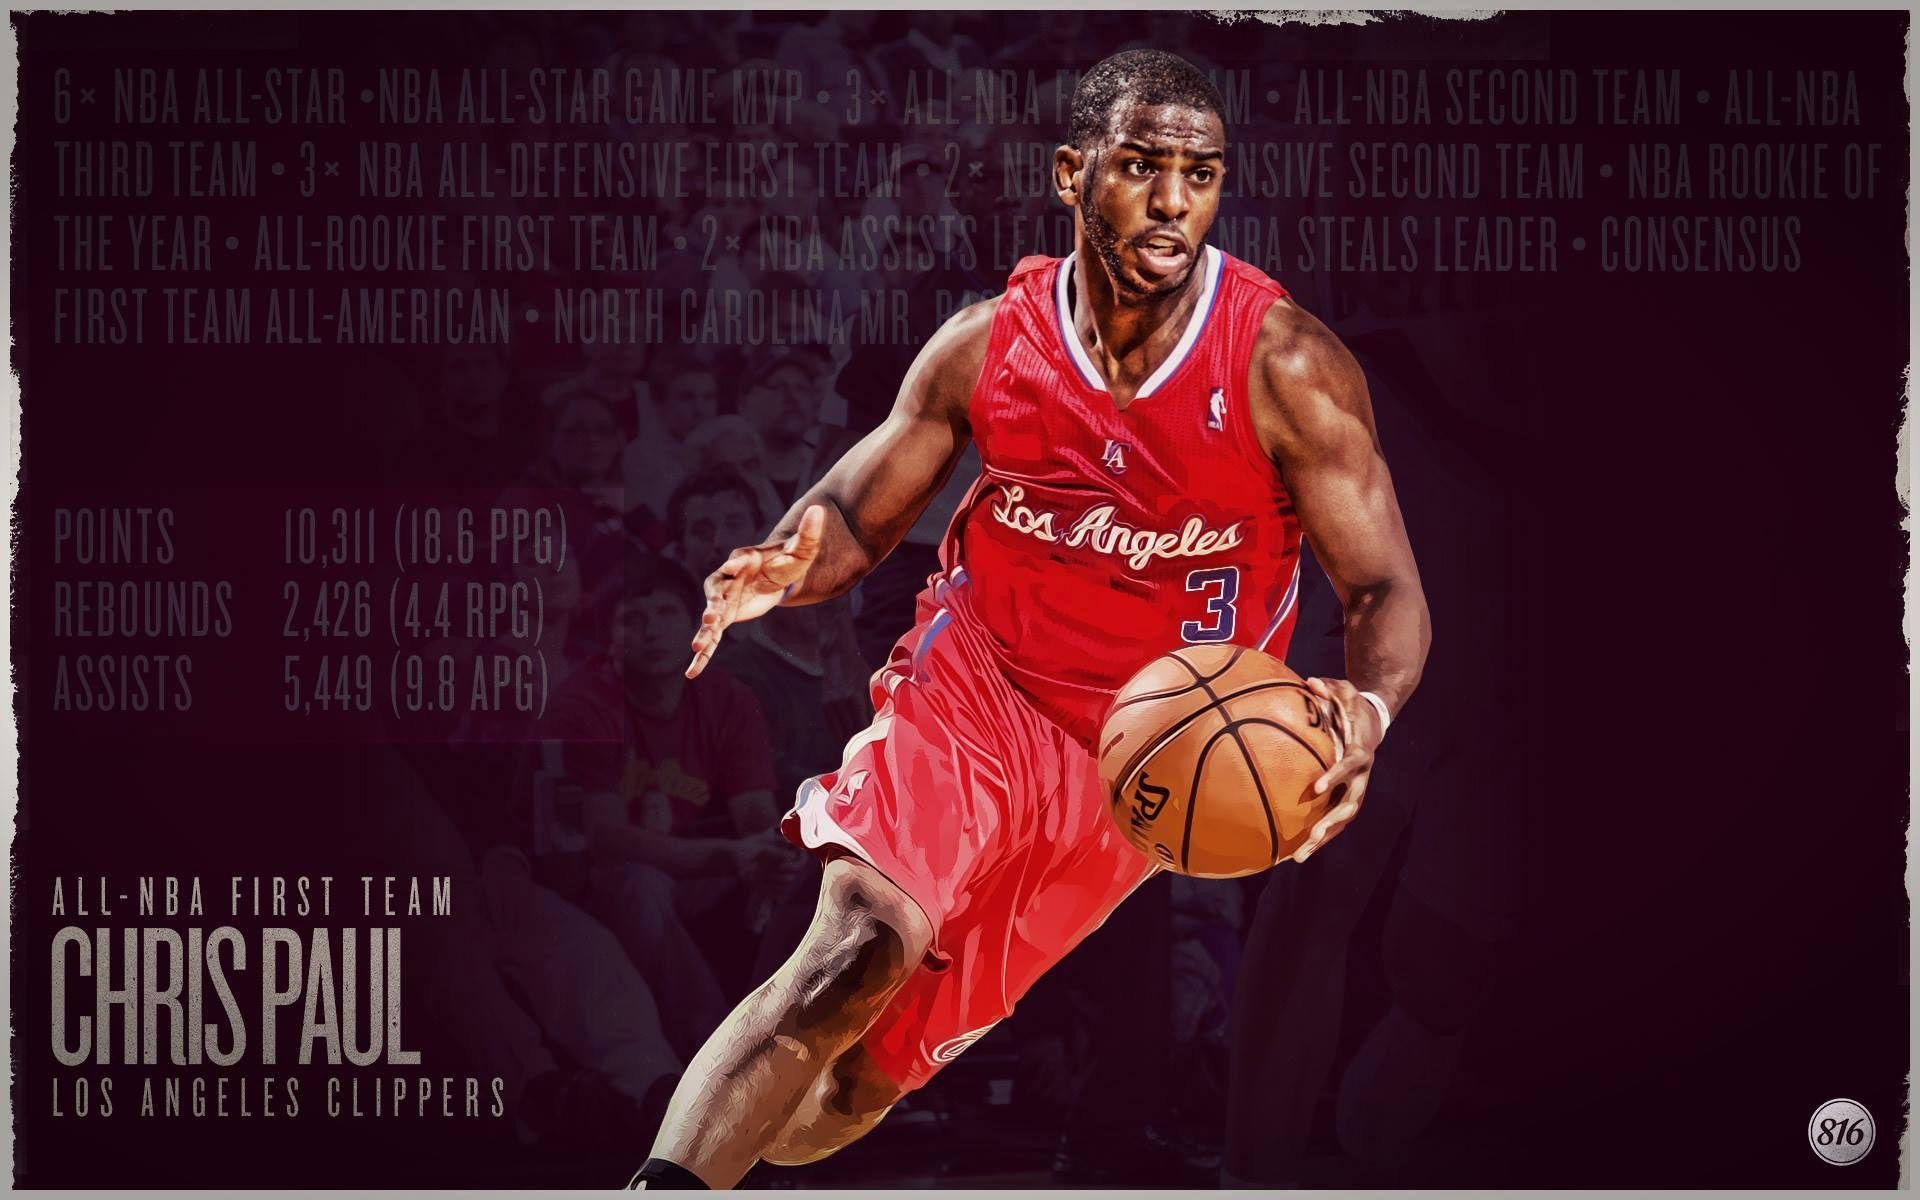 1920x1200 Los Angeles Clippers Wallpapers | Basketball Wallpapers at .